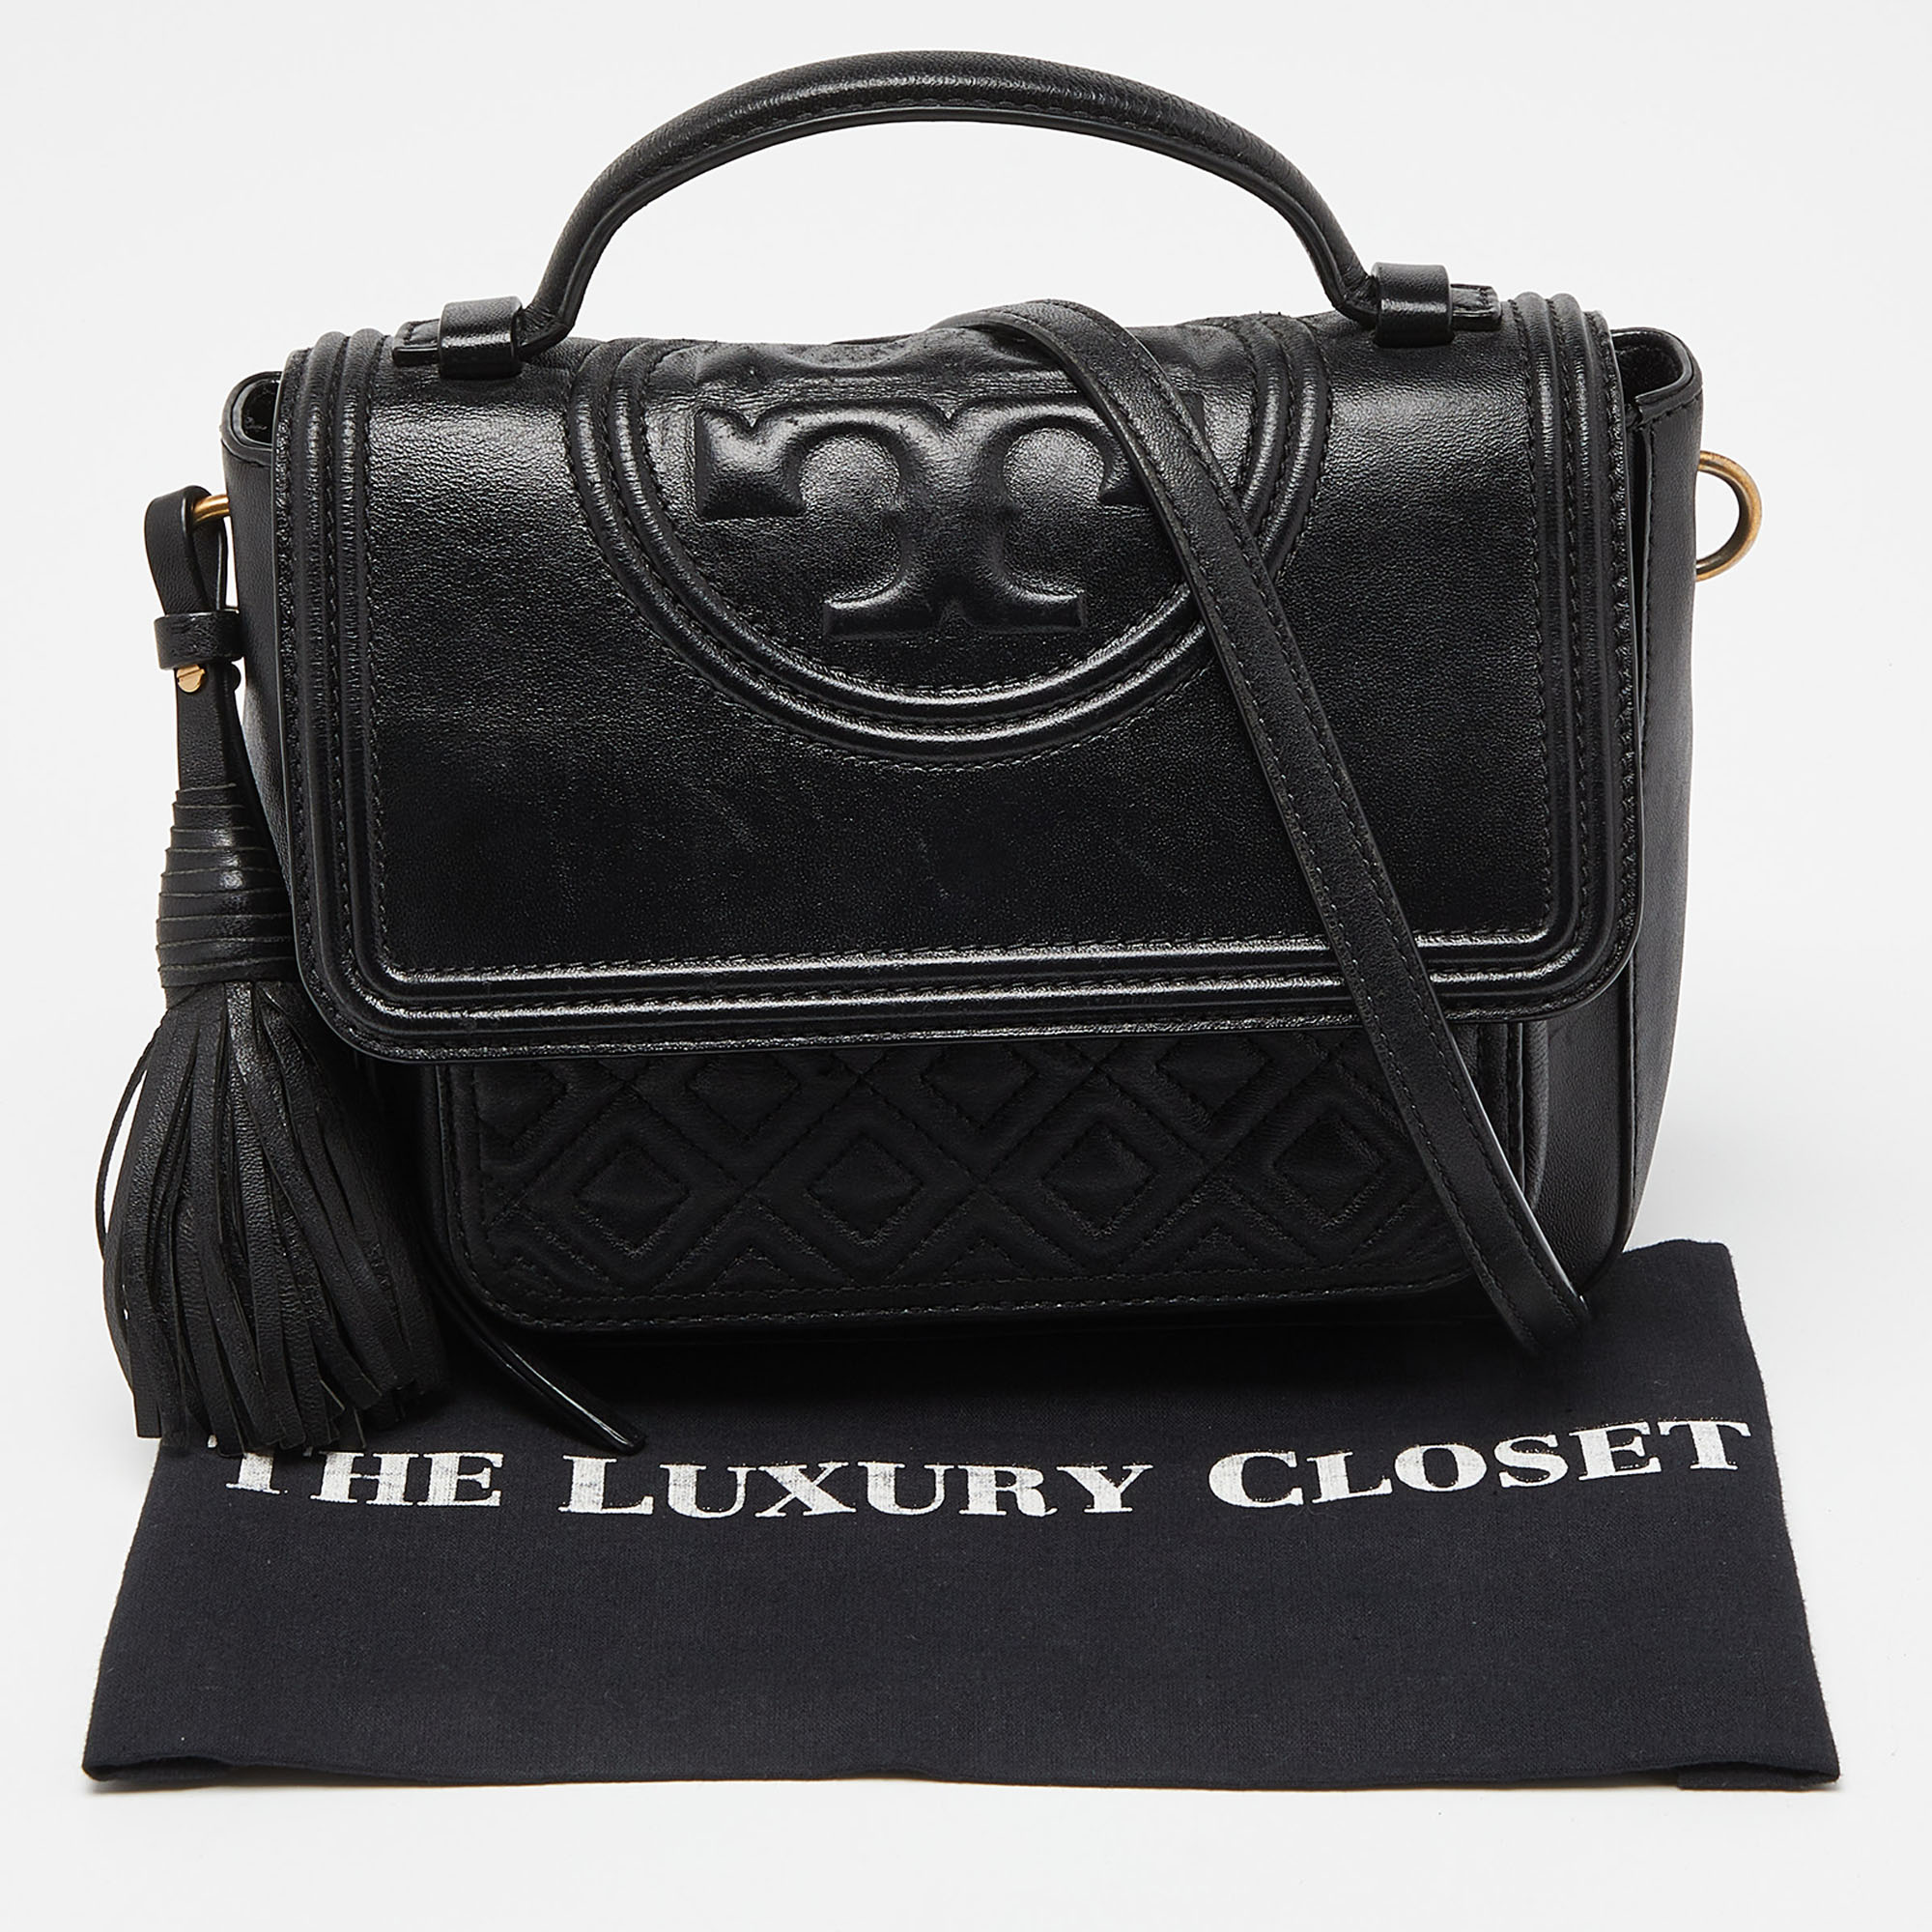 Tory Burch Black Quilted Leather Flap Top Handle Bag